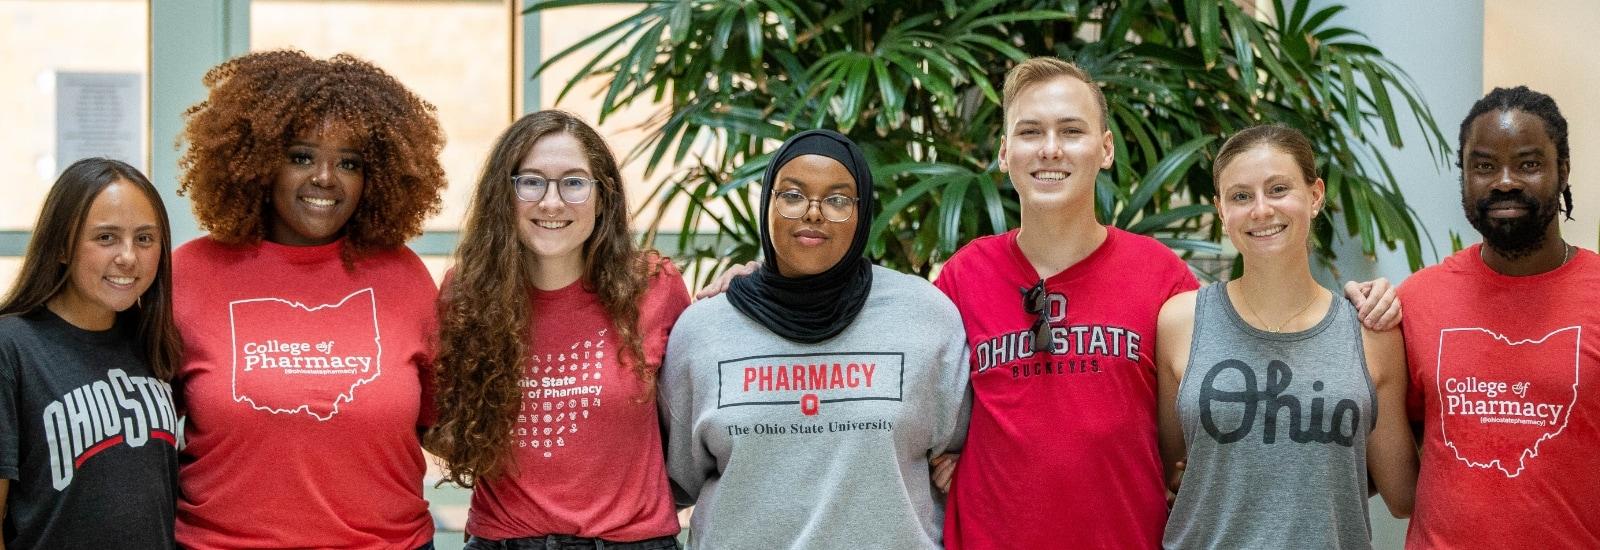 students standing in a line in pharmacy shirts